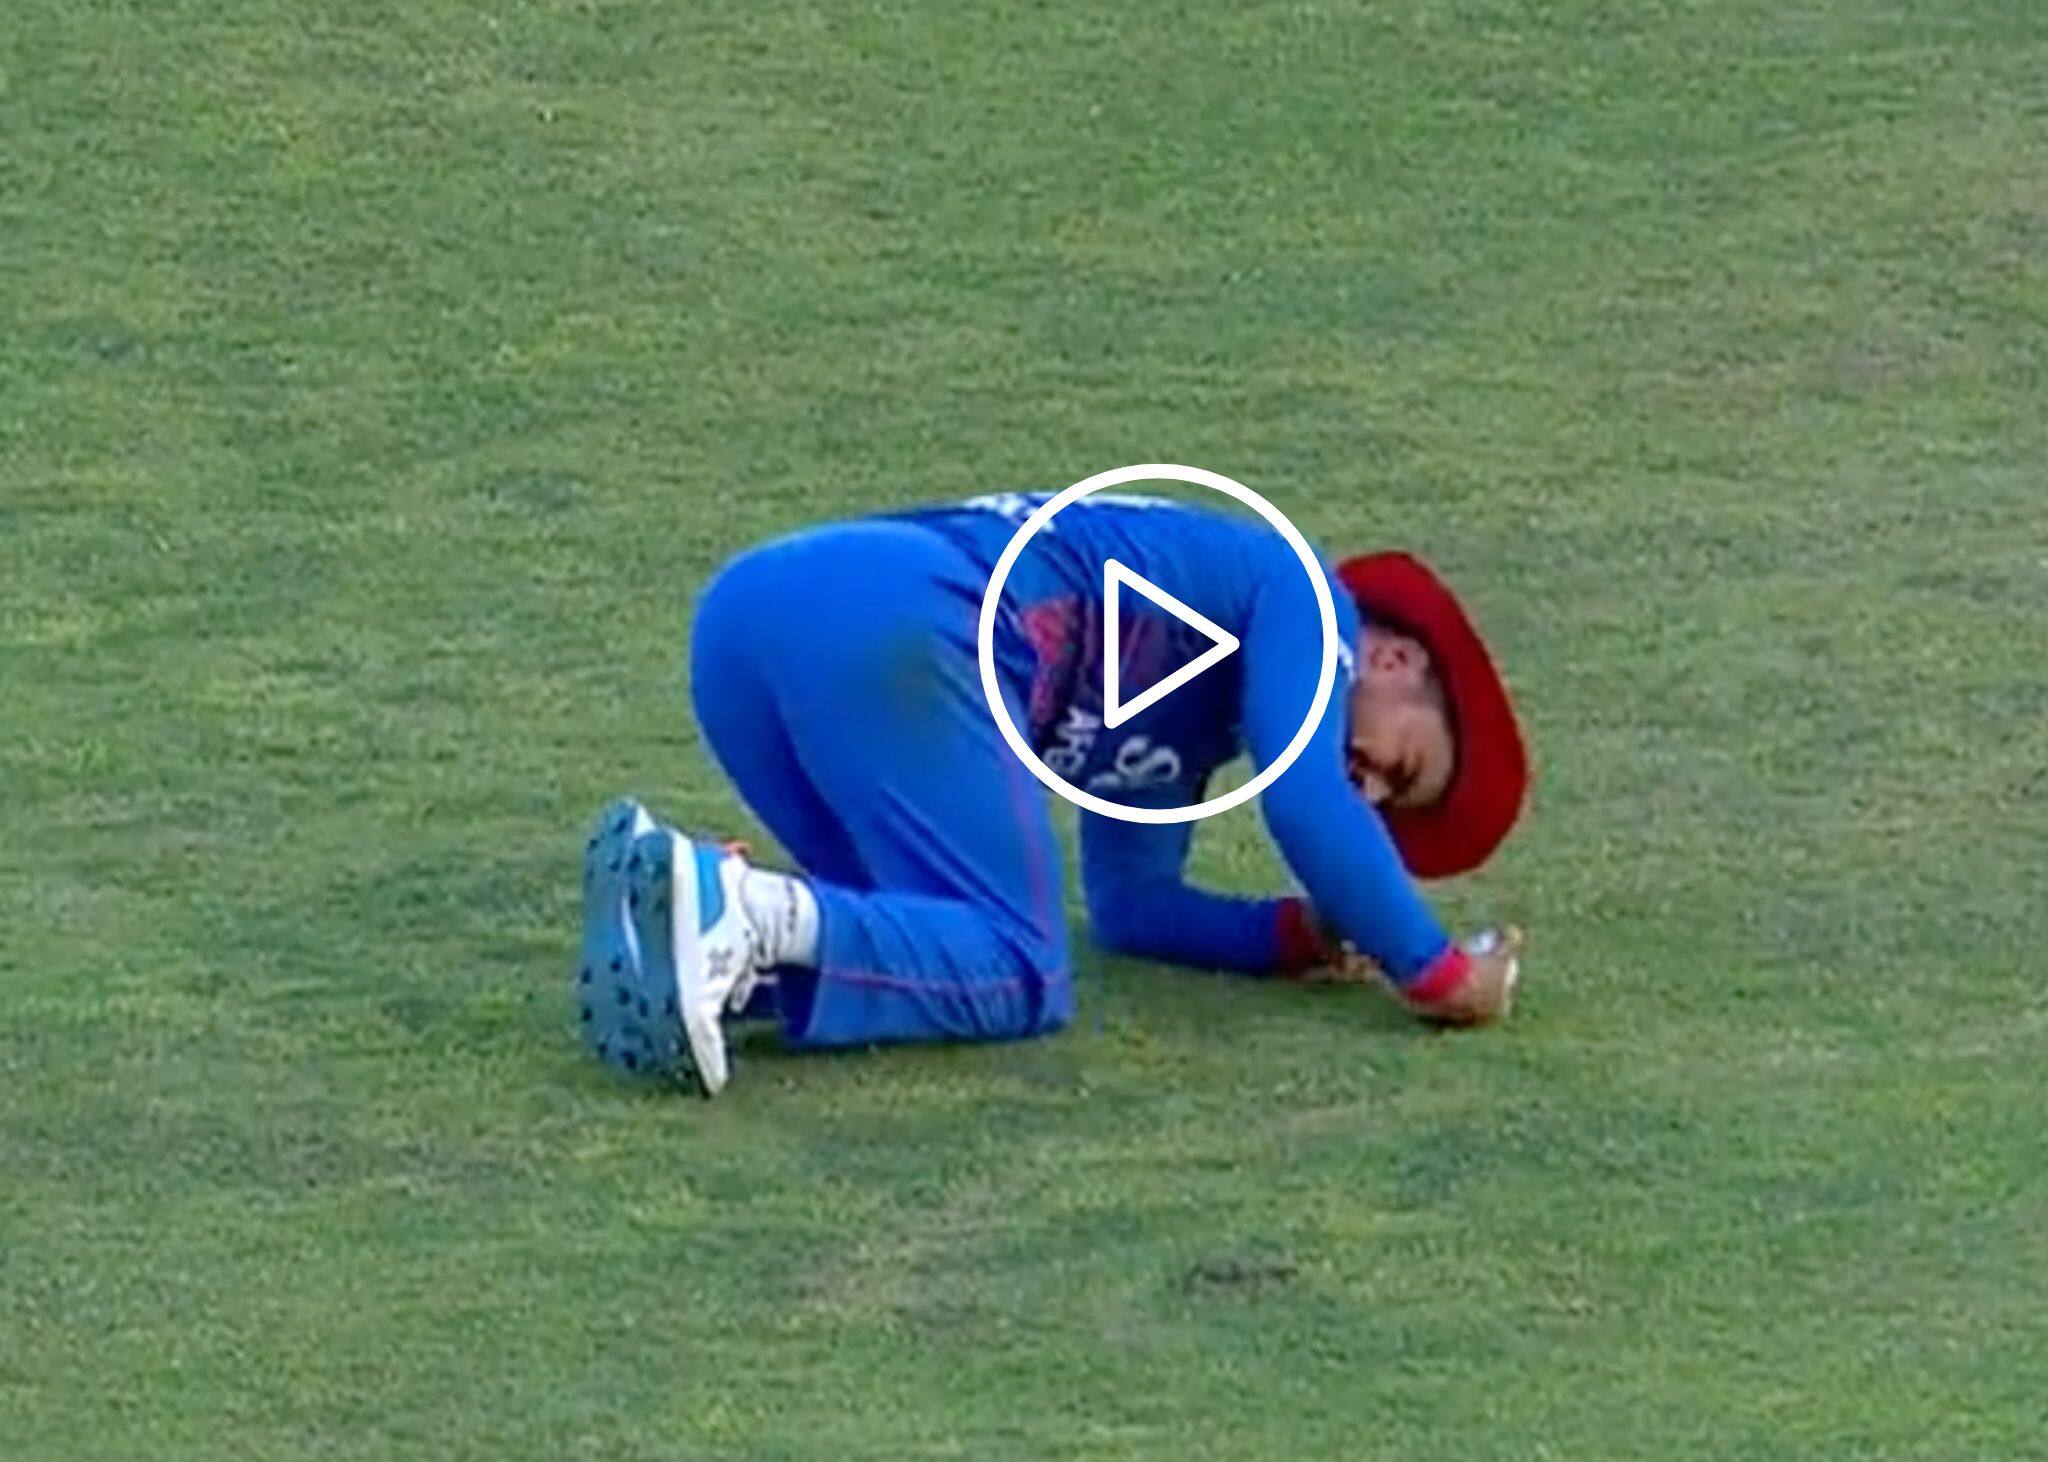 [Watch] Rashid Khan Injures Himself Badly After A 'Spectacular' Catch